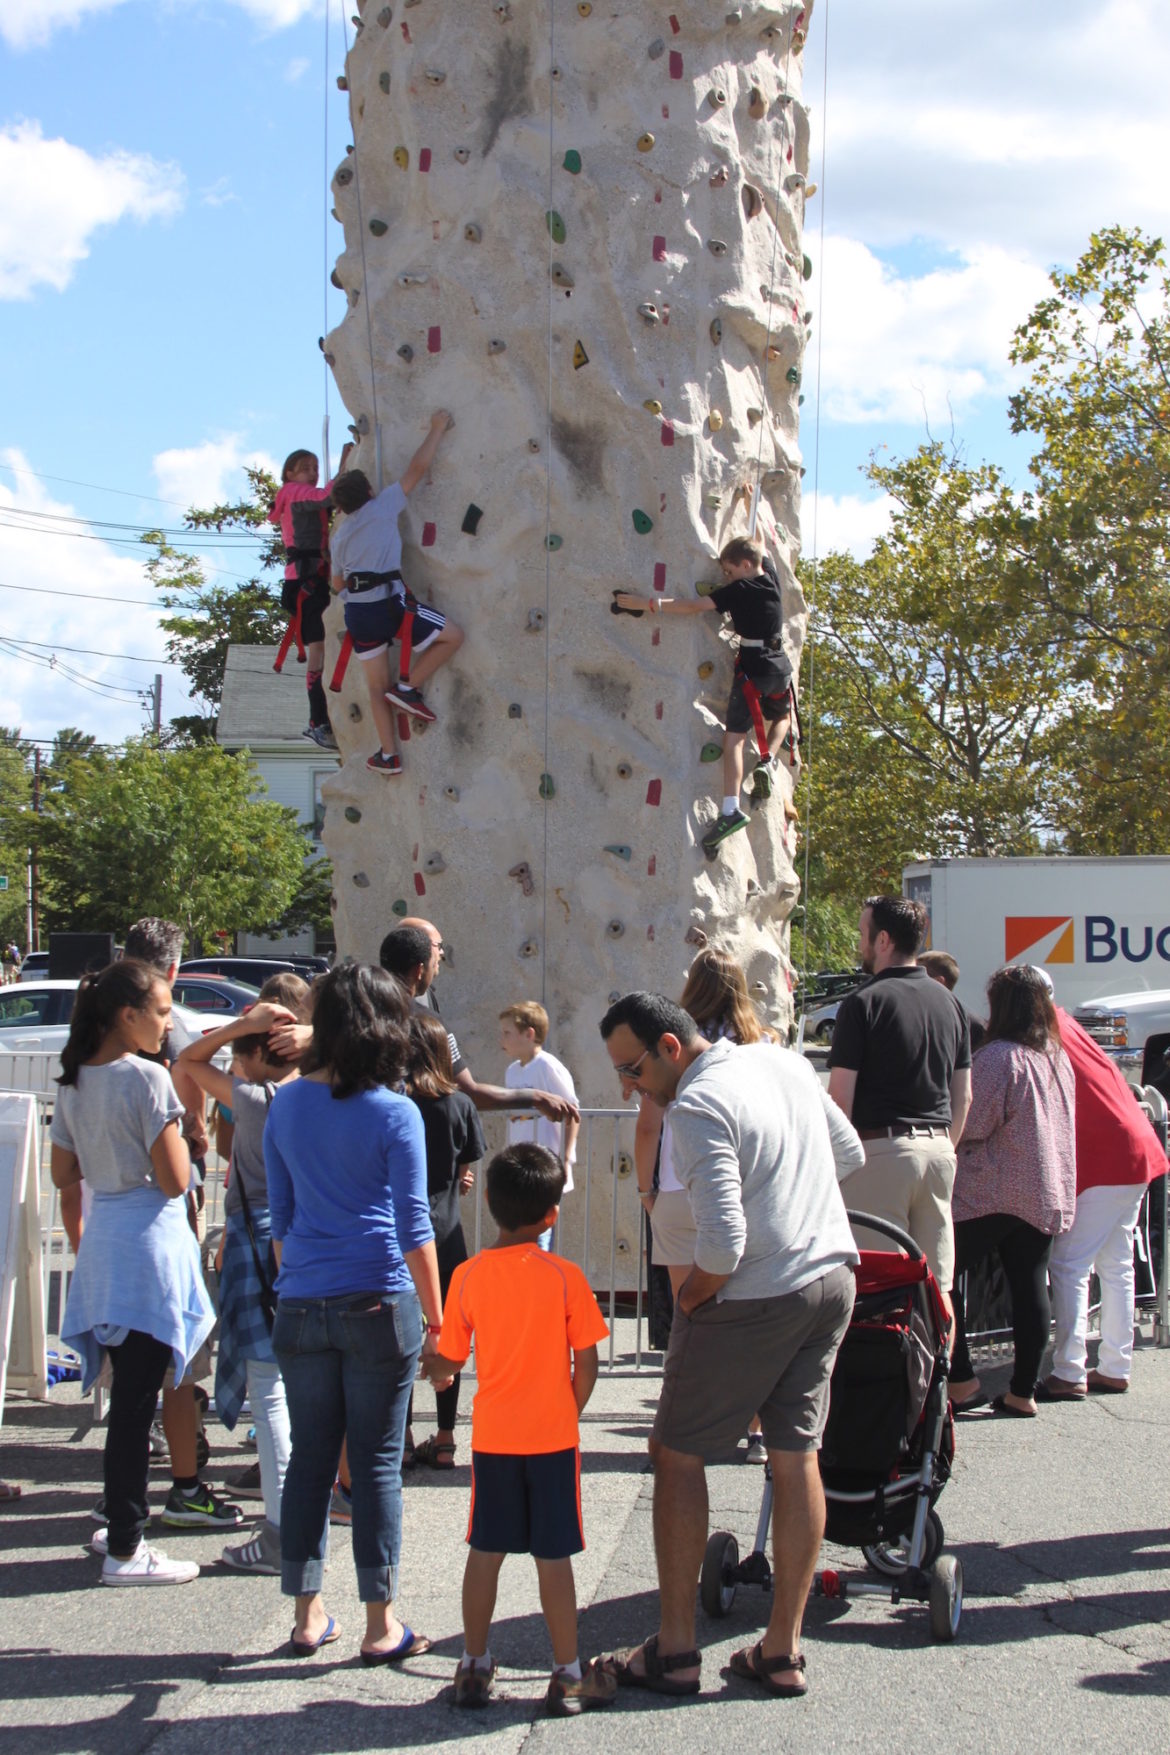 The climbing wall was a new addition to the Faire on the Square, and a popular one.